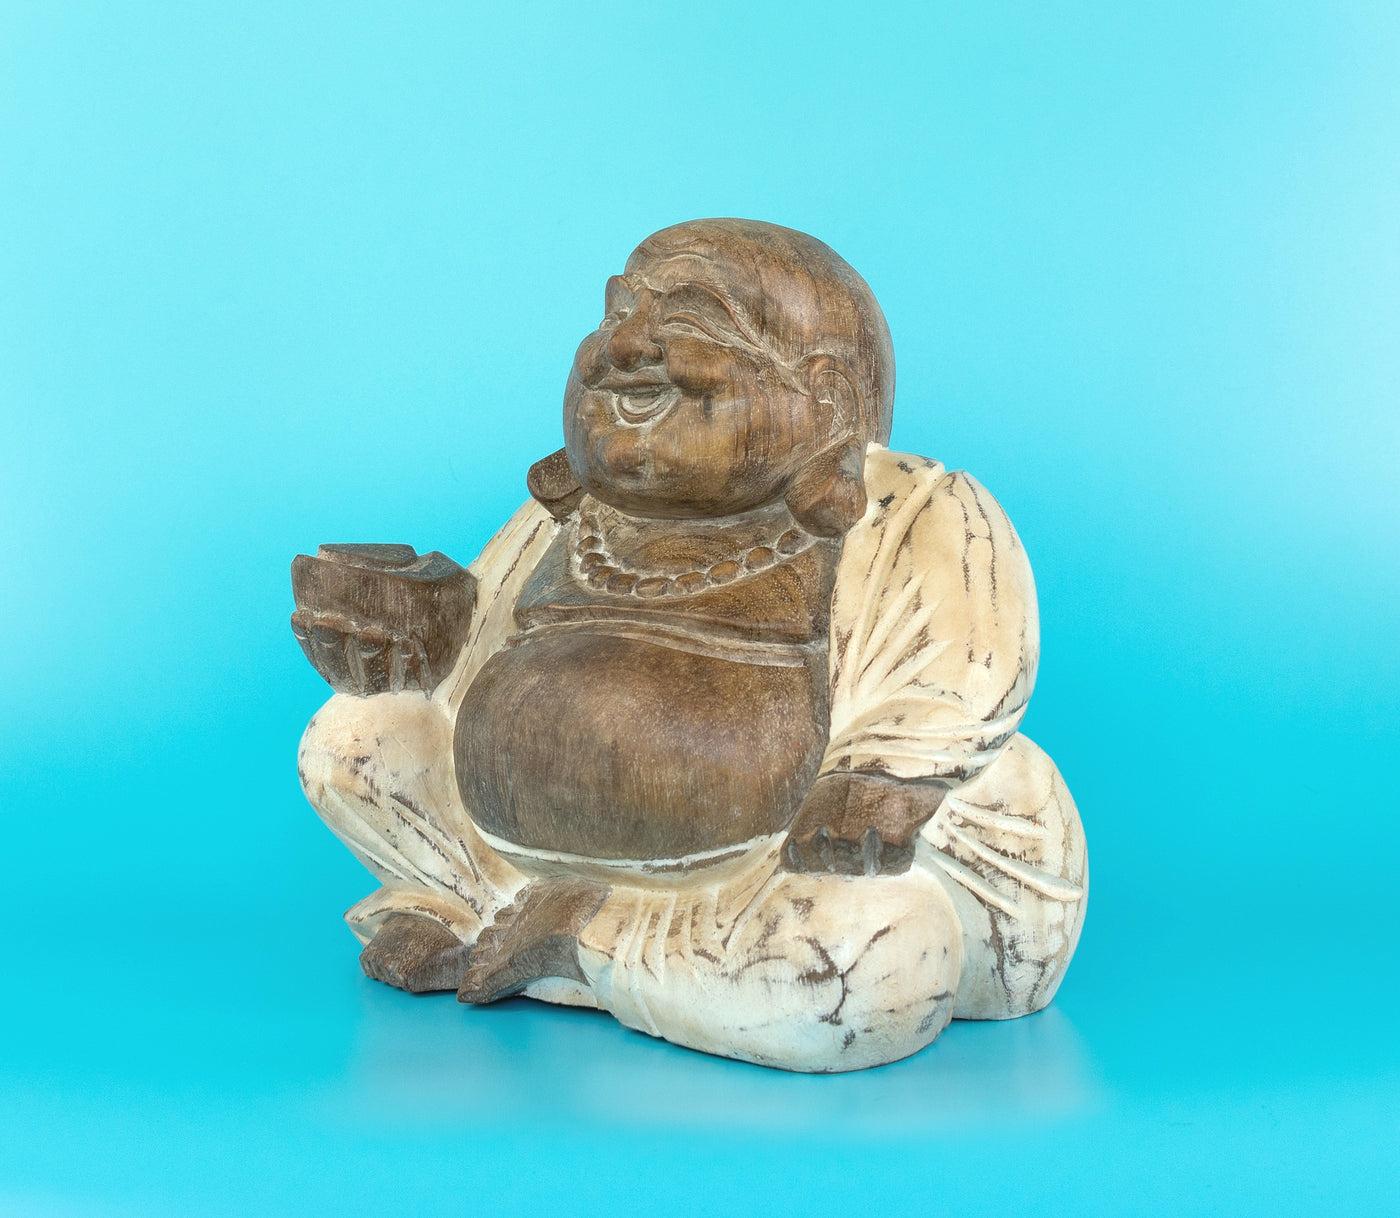 8" White Washed Wooden Laughing Happy Buddha Statue Hand Carved Smiling Sitting Sculpture Handmade Figurine Decorative Home Decor Handcrafted Art Decoration